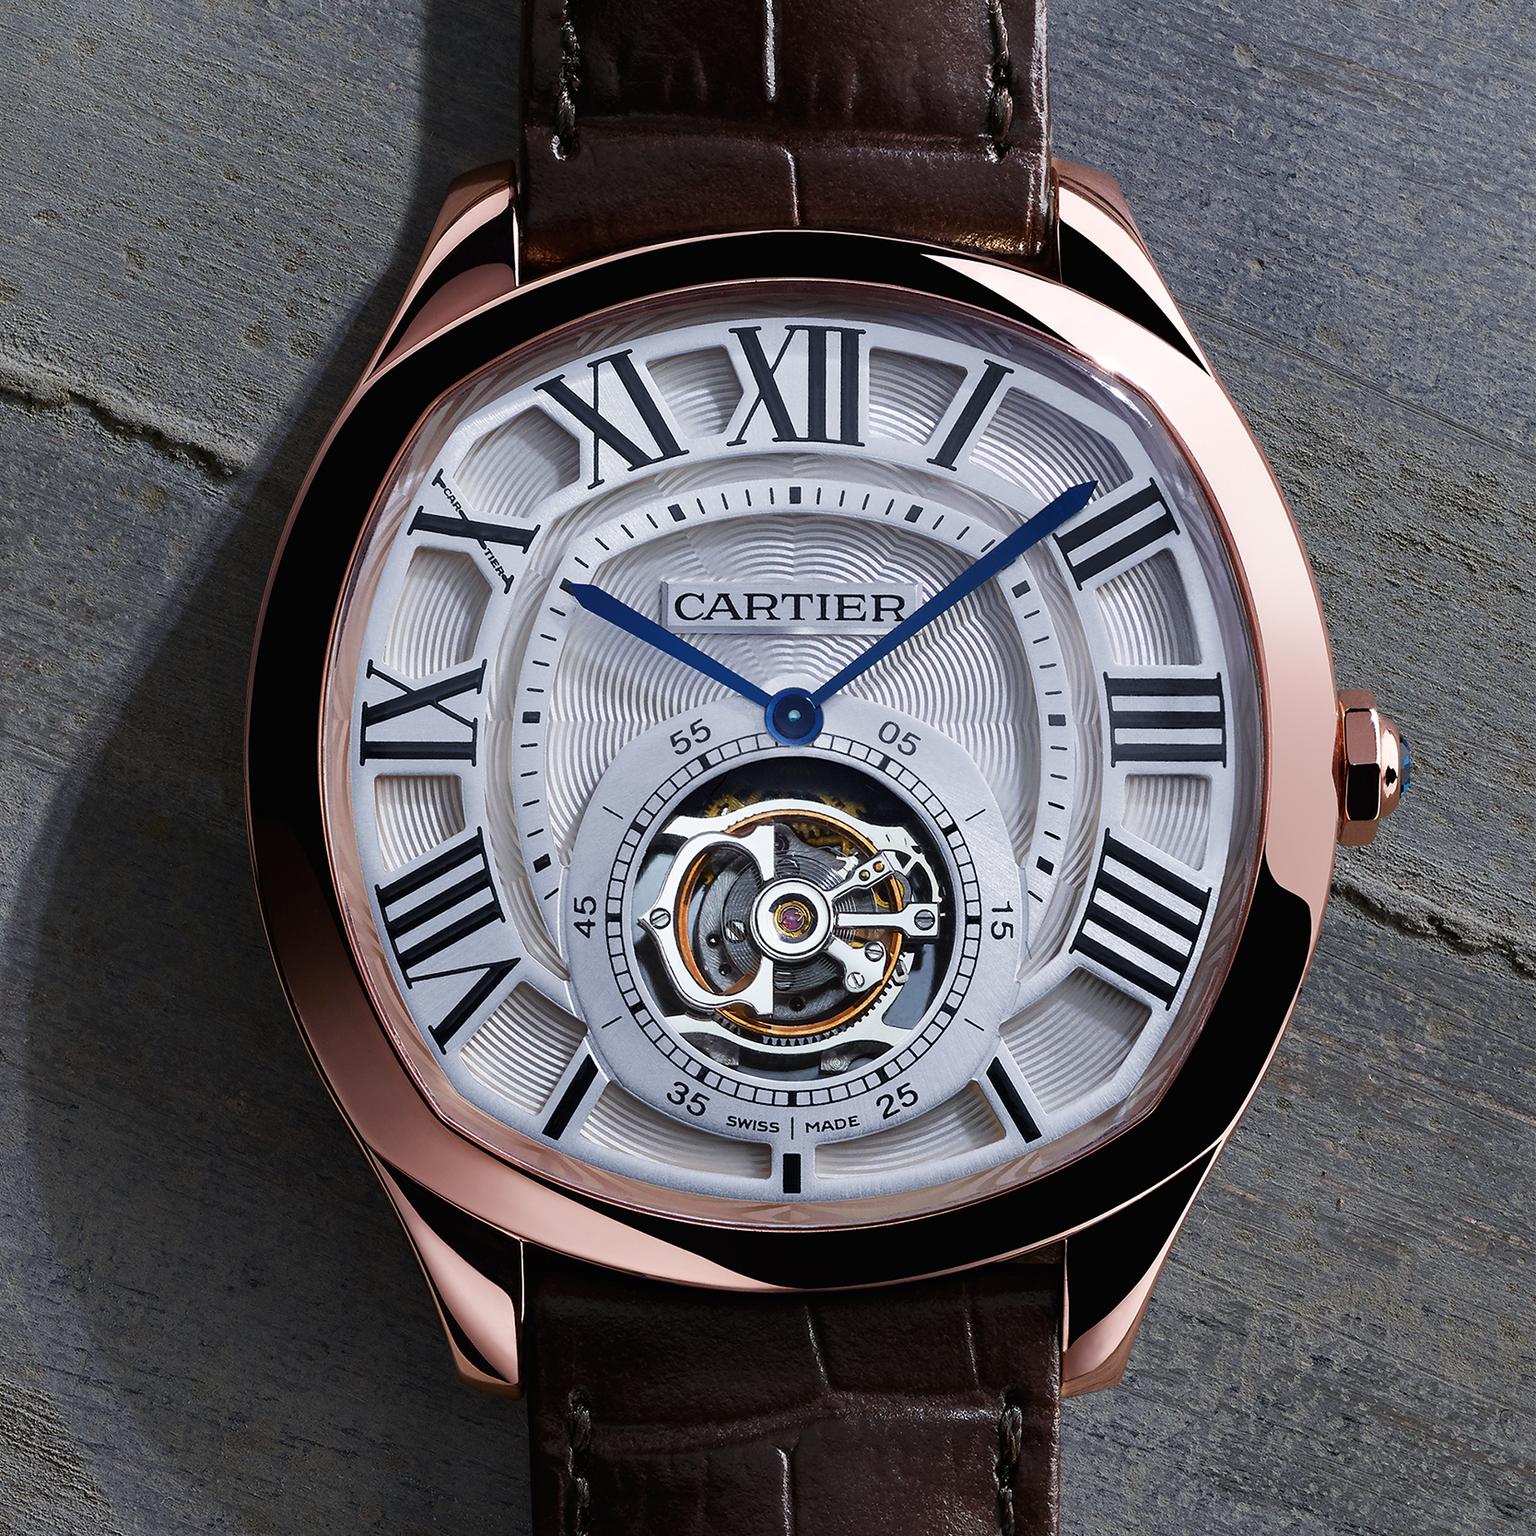 Cartier Drive watch in rose gold